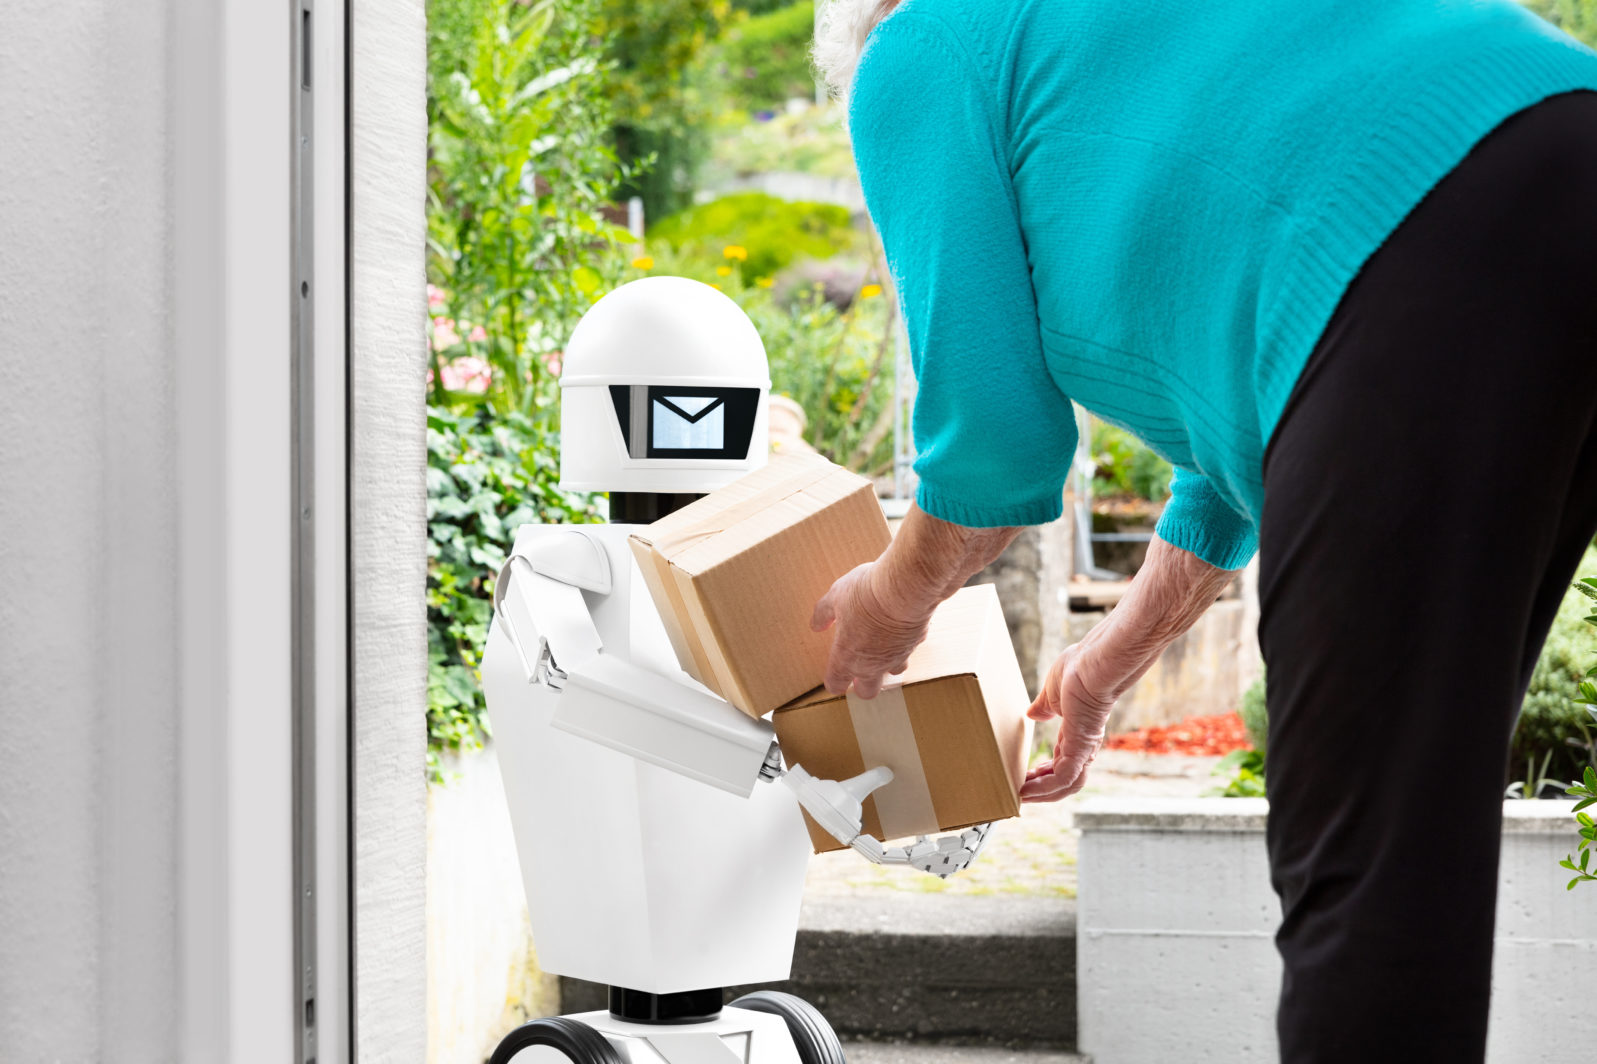 senior woman is receiving post from an futuristic robotic delivery service